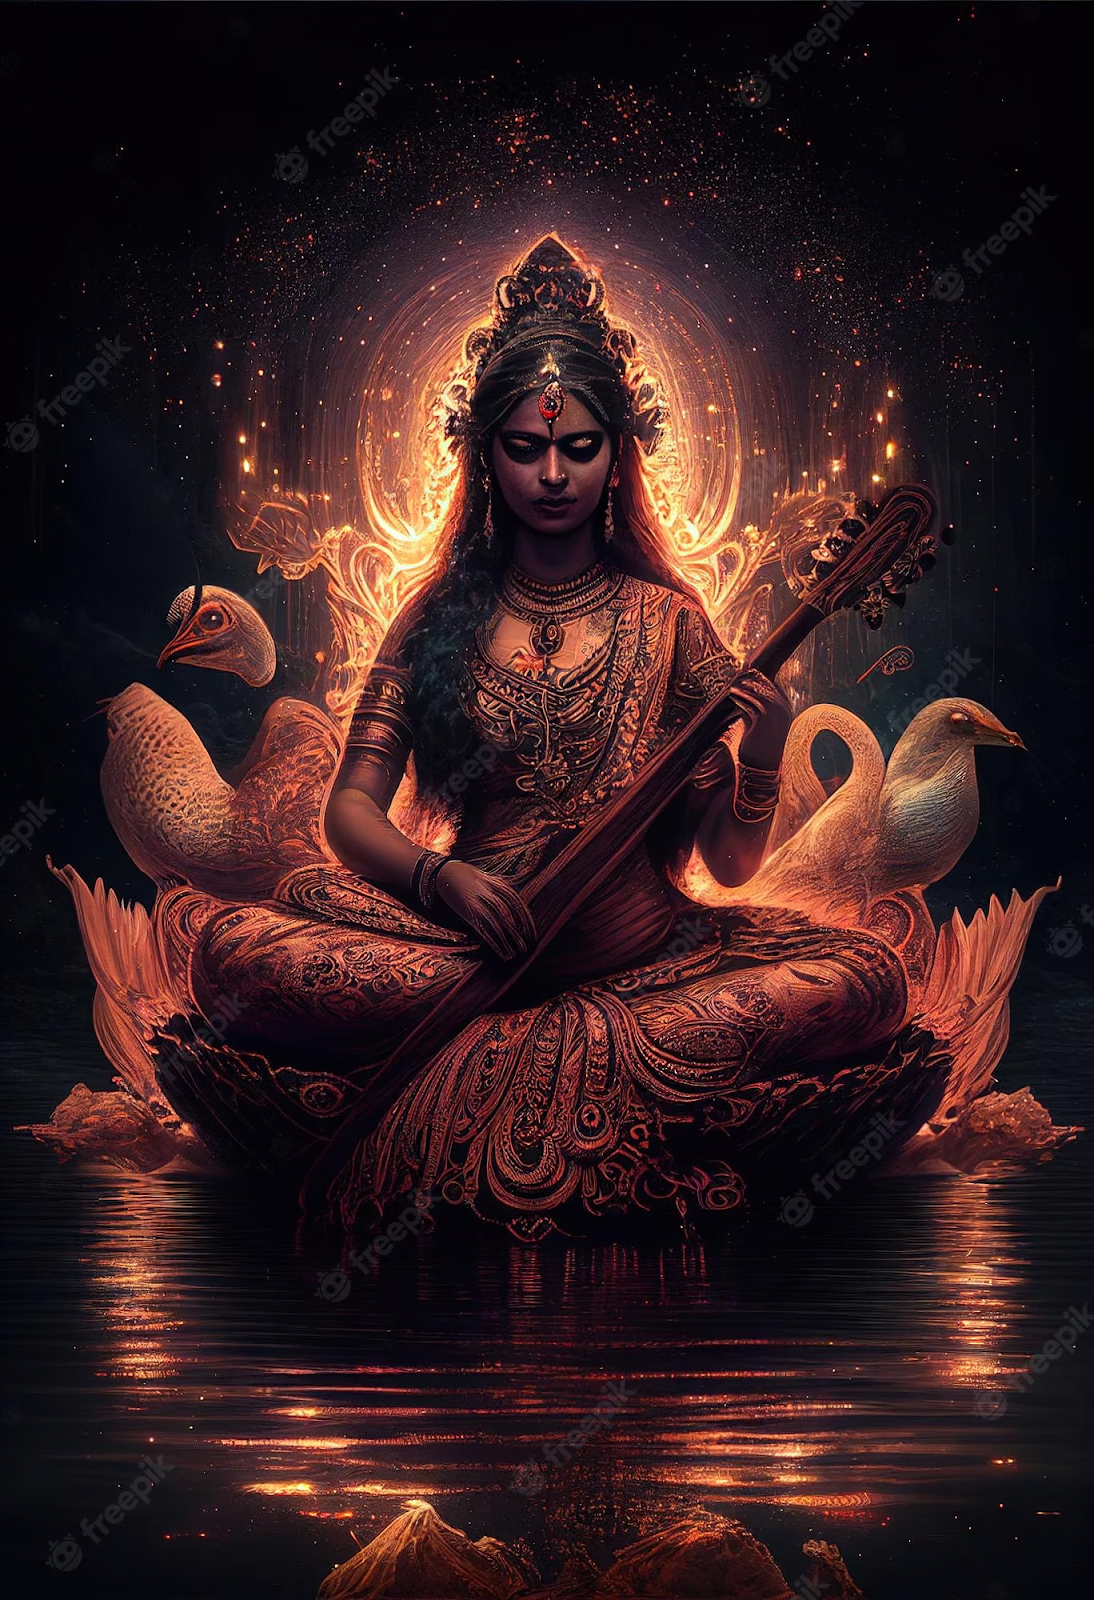 Throughout this image, Saraswati appears to emanate and permeate golden light. As she sits cross-legged on a lotus flower atop a body of water, Saraswati plays the Veena while wearing a gold sari and golden jewelry. 